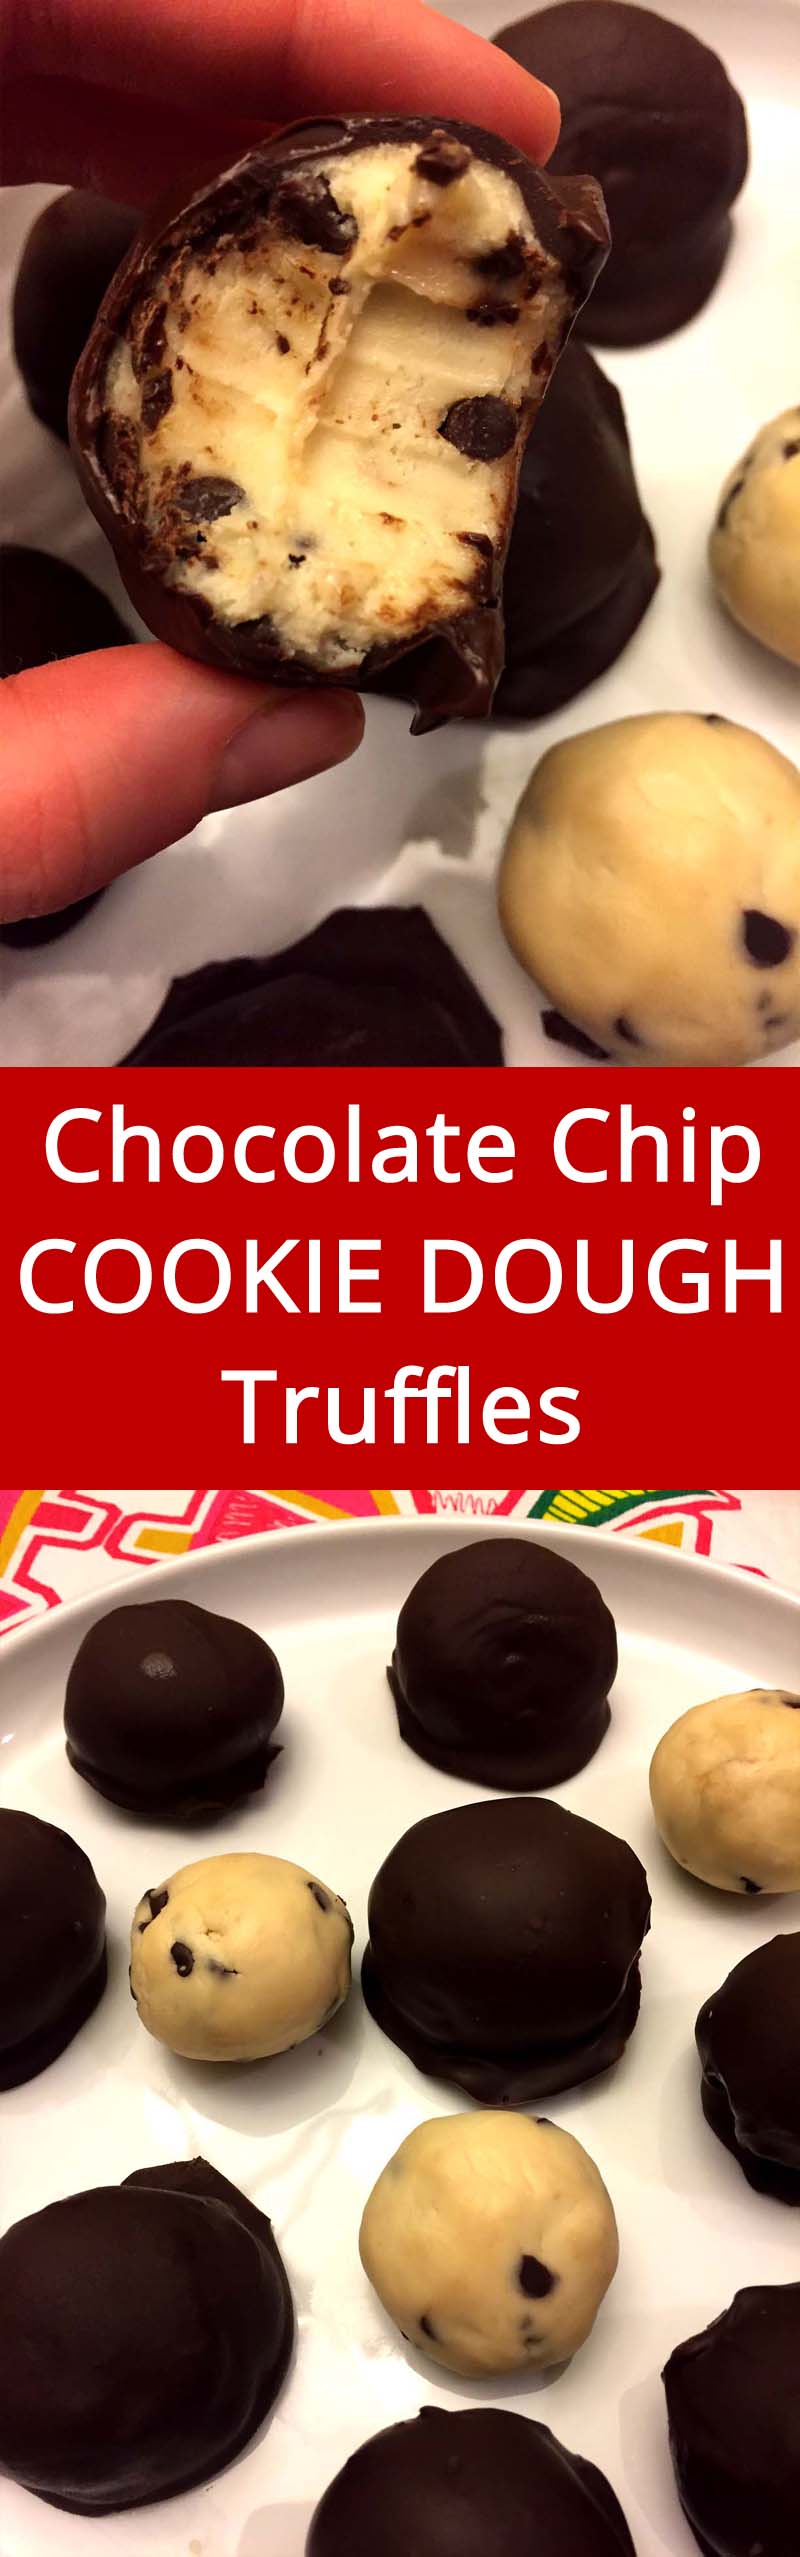 OMG the cookie dough lover's heaven!  These truffles are genius!  LOVE LOVE LOVE!